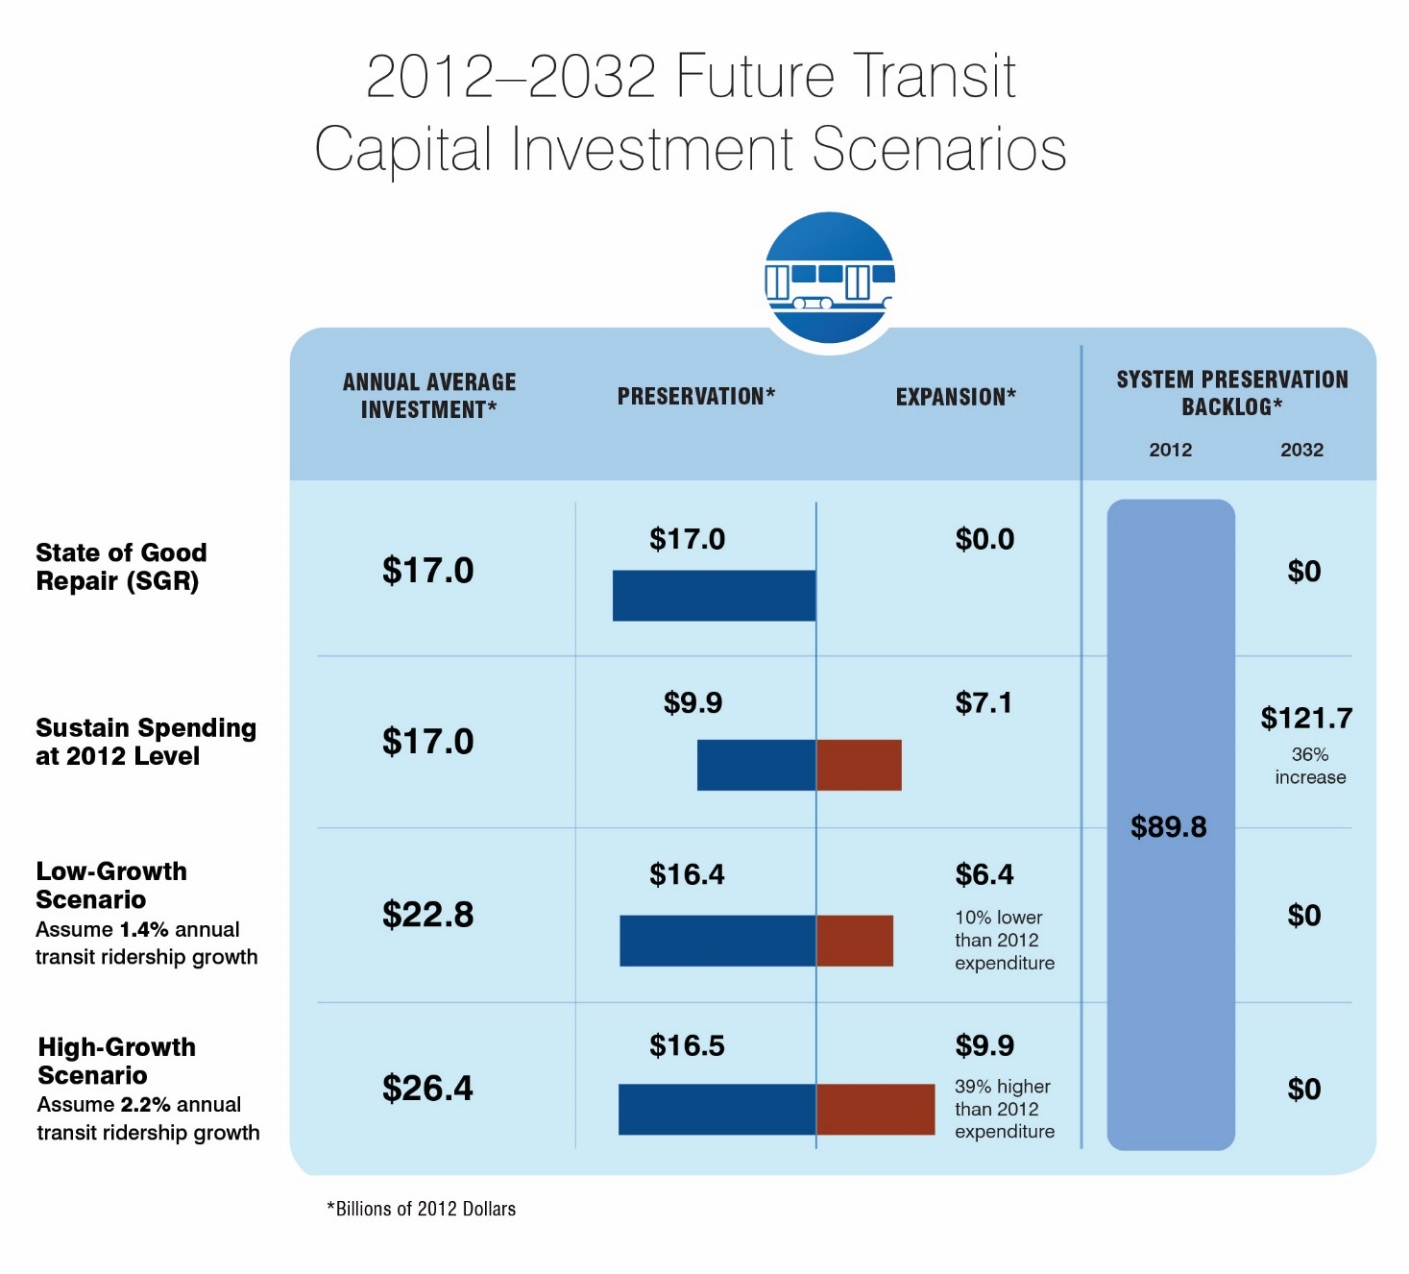 This exhibit illustrates trends in future transit capital investment scenarios for the 20-year period from 2012 to 2032 under four scenarios: State of Good Repair (SGR), Sustain Spending at 2012 Levels, Low-Growth scenario, and High-Growth scenario. The annualized cost of the SGR scenario is $17.0 billion (all preservation investments). The current system preservation backlog is $89.8 billion. The Sustain 2012 Spending scenario assumes that capital spending is sustained at the 2012 levels ($17.0 billion) through 2032. Assuming that the current split between preservation ($9.9 billion) and expansion ($7.1 billion) investments is maintained, by 2032, this scenario would result in $121.7 billion in deferred system preservation projects, a 36-percent increase over the $89.8-billion system preservation backlog. The annualized cost of the Low-Growth scenario is $22.8 billion and assumes the split between preservation and expansion investments is $16.4 billion and $6.4 billion, respectively. The $6.4-billion expansion investment is 10 percent lower than the 2012 expenditure of $7.1 billion. The annualized cost of the high-growth scenario is $26.4 billion and assumes the split between preservation and expansion investments is $16.5 billion and $9.9 billion, respectively. The $9.9-billion expansion investment is 39 percent higher than the 2012 expenditure of $7.1 billion. 